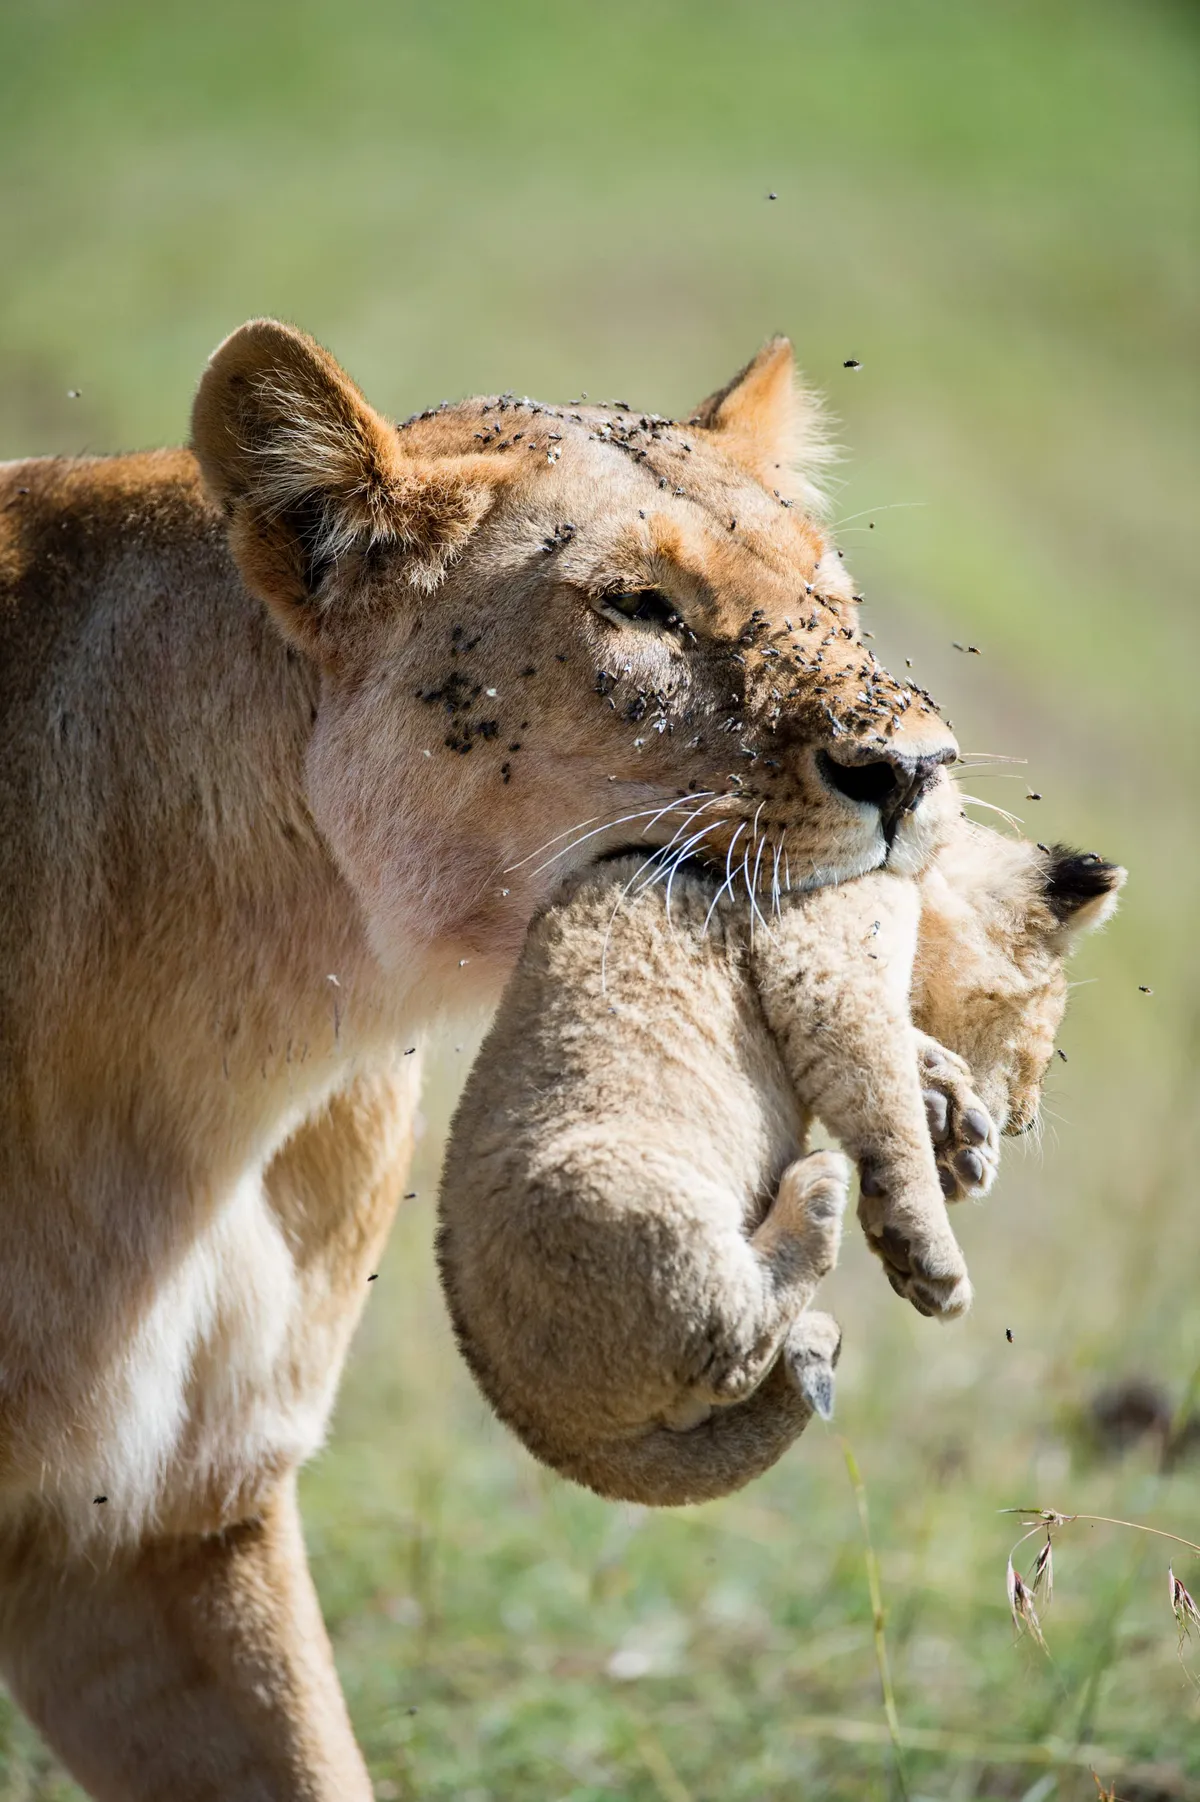 Having just missed the first, I waited two hours for this lioness to collect her second cub. The flies, tender care of the lioness, and helplessness of the cub all combine in this image. © David Plummer